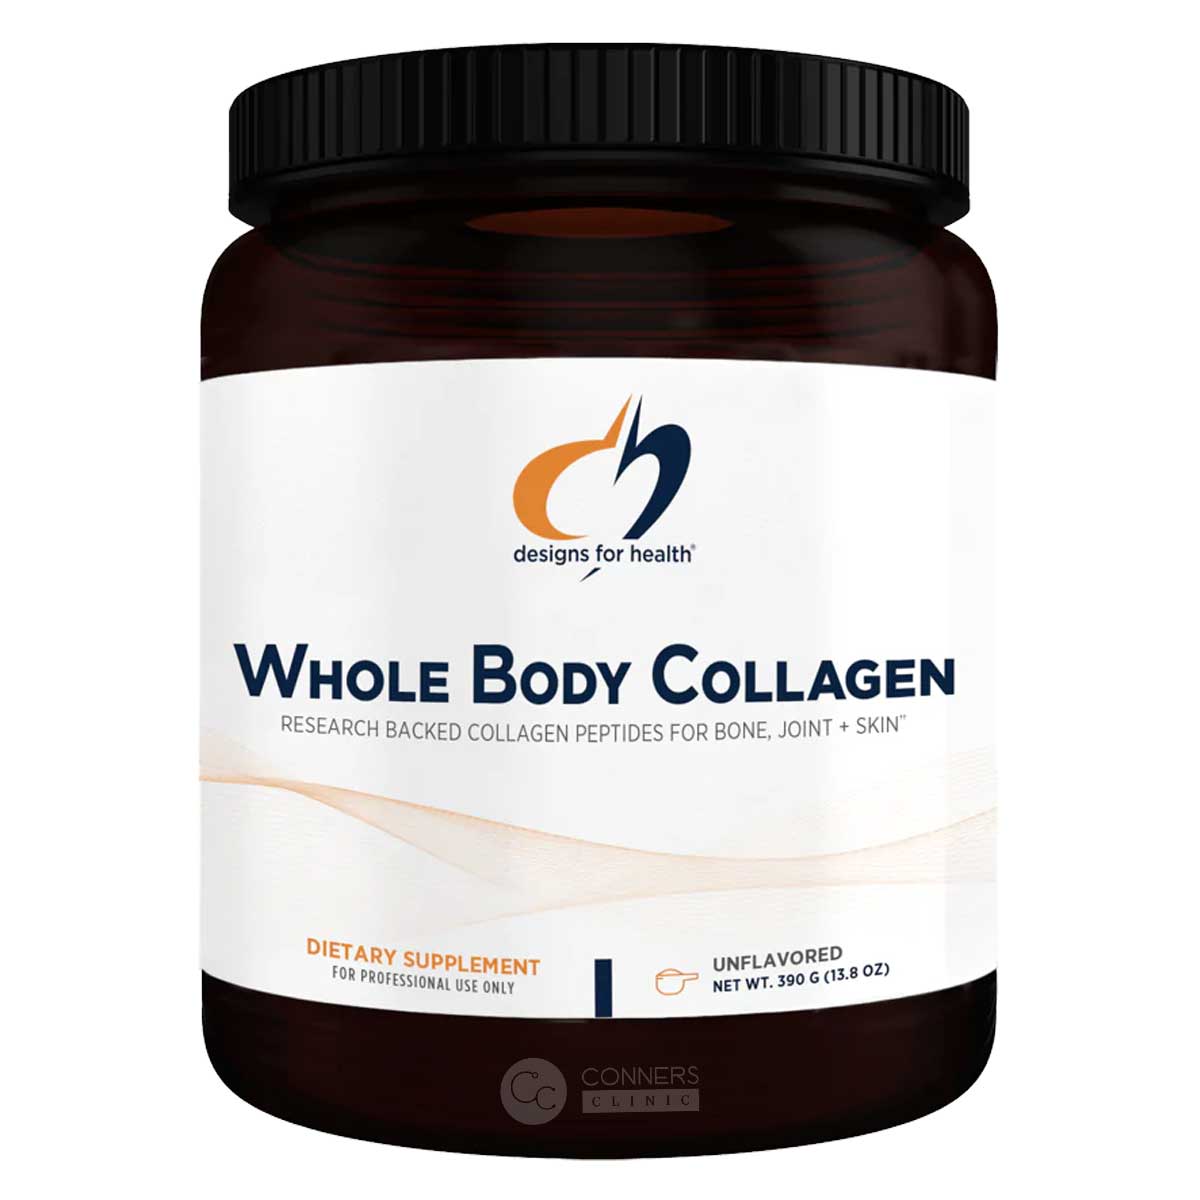 Whole Body Collagen powder Designs for Health Supplement - Conners Clinic